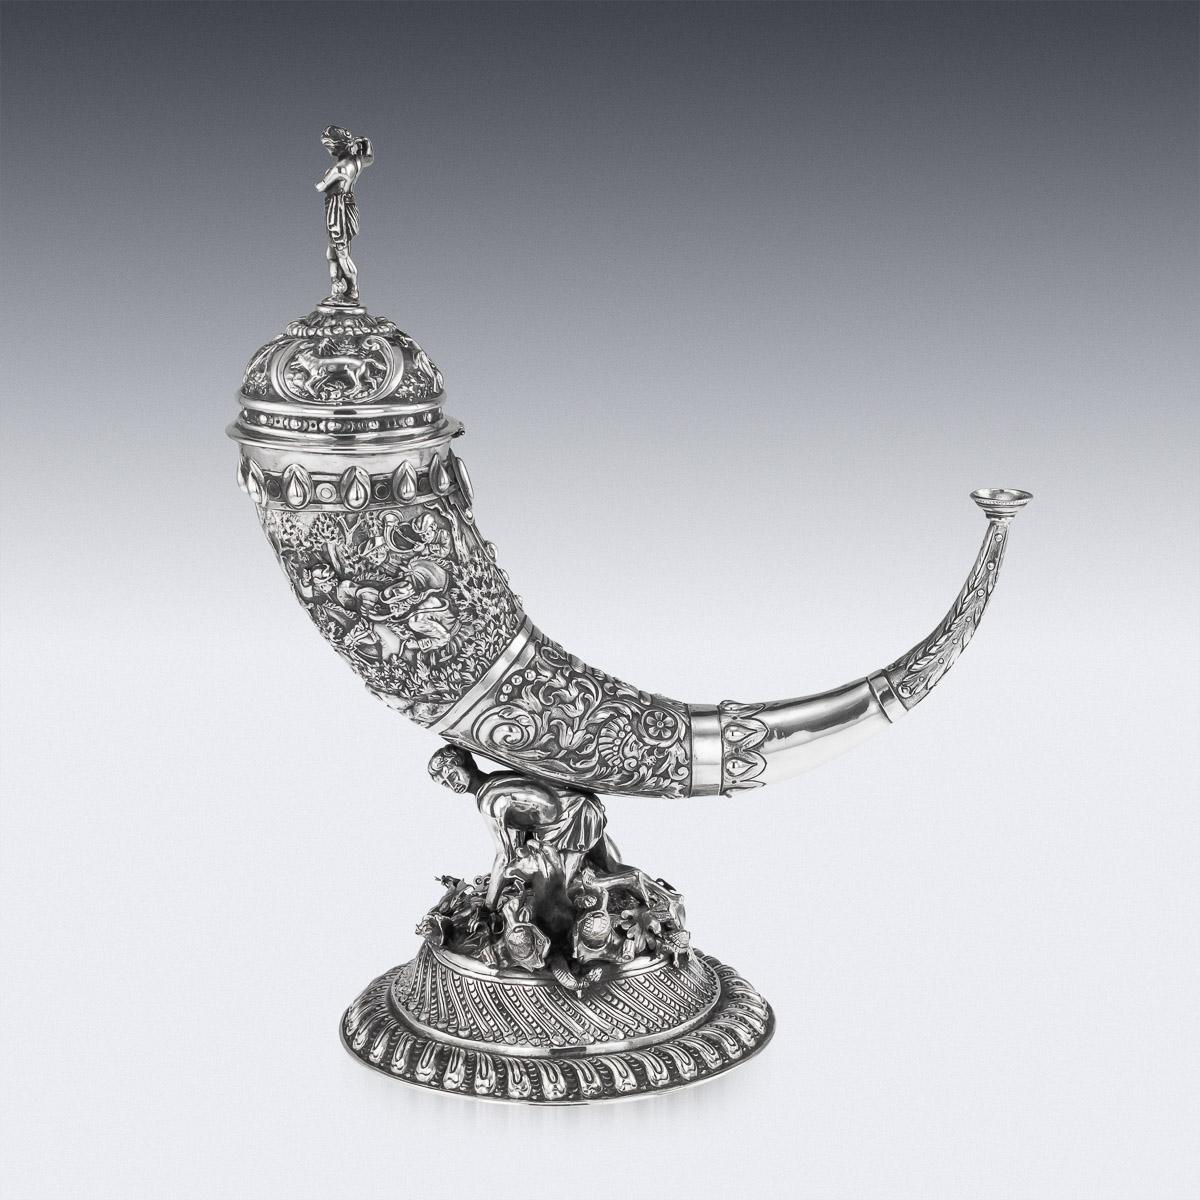 Antique late-19th century German solid silver lidded drinking cup, shaped as a hunting horn. Embossed throughout with hunting scenes, depicting hunters riding on horseback through a dense forest, chasing a stag. The horn supported by a hunter with